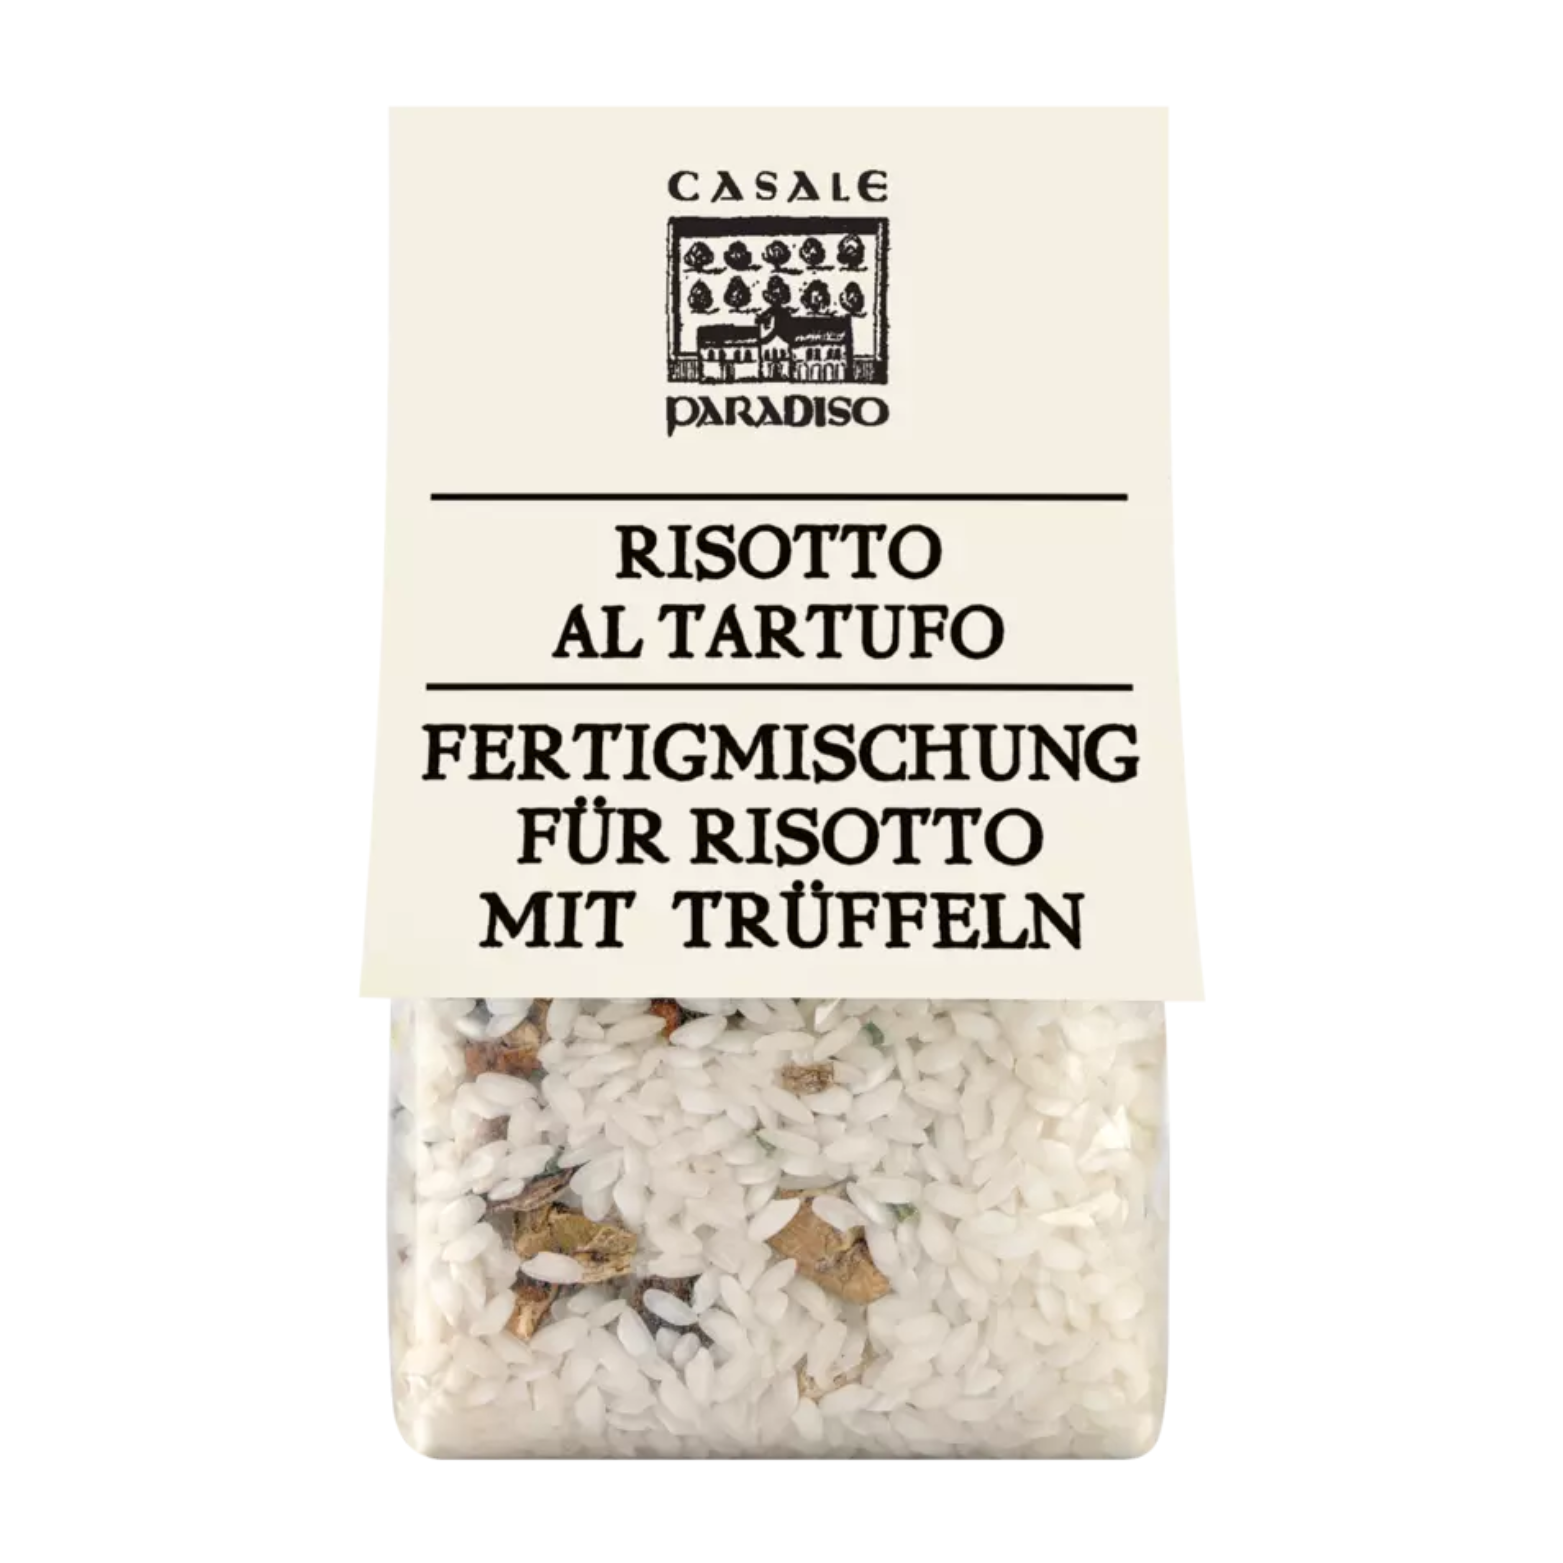 Risotto mit Sommertrüffeln, casale paradiso – 300g